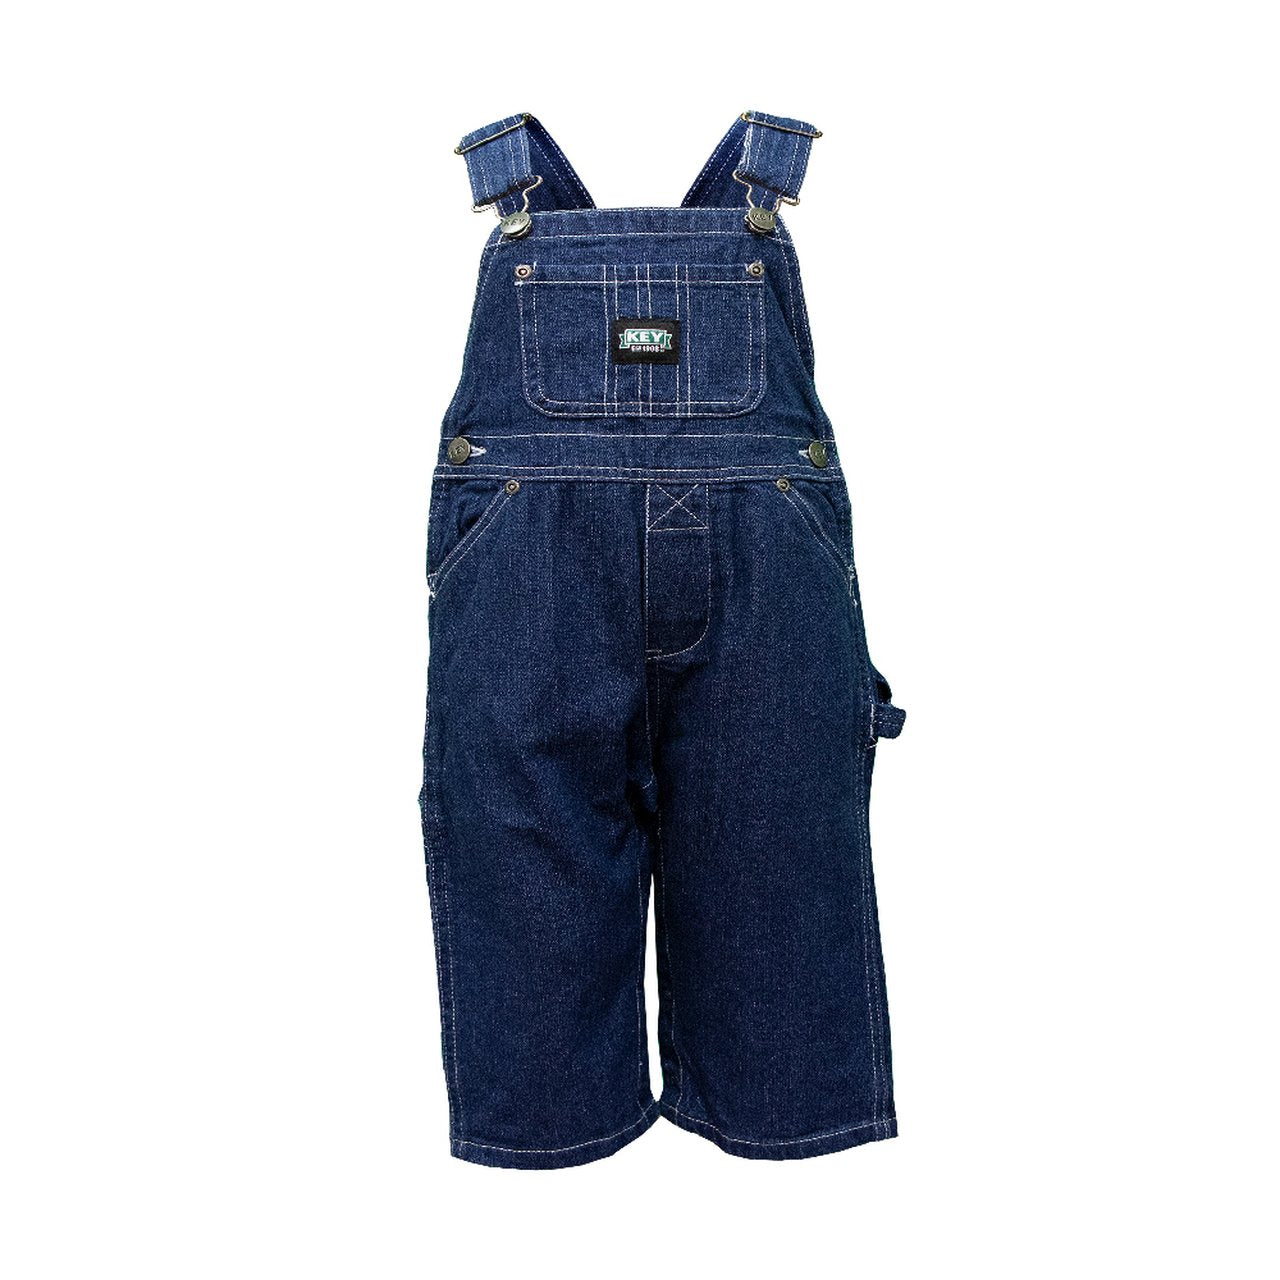 Front of infant & toddler dungarees from key industries USA showing multiple pockets, zip fly and side button fastening.